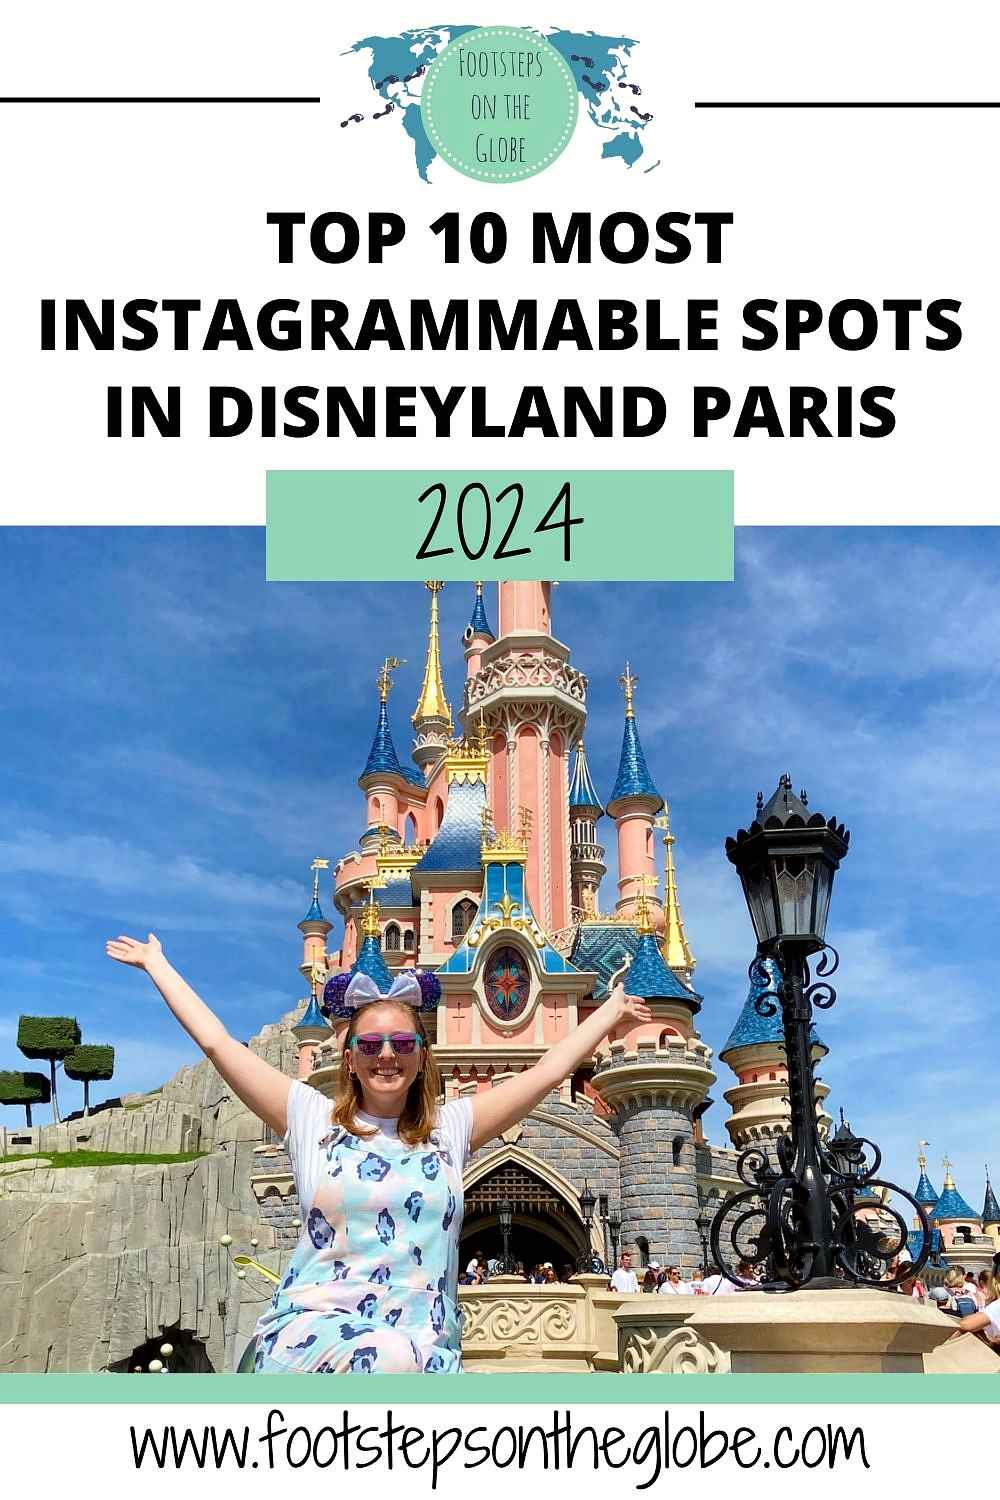 Mel wearing green overalls and mouse ears with her arms up in front of Disneyland Paris Sleeping Beauty's castle with the text: "Top 10 most instagrammable spots in Disneyland Paris 2024"